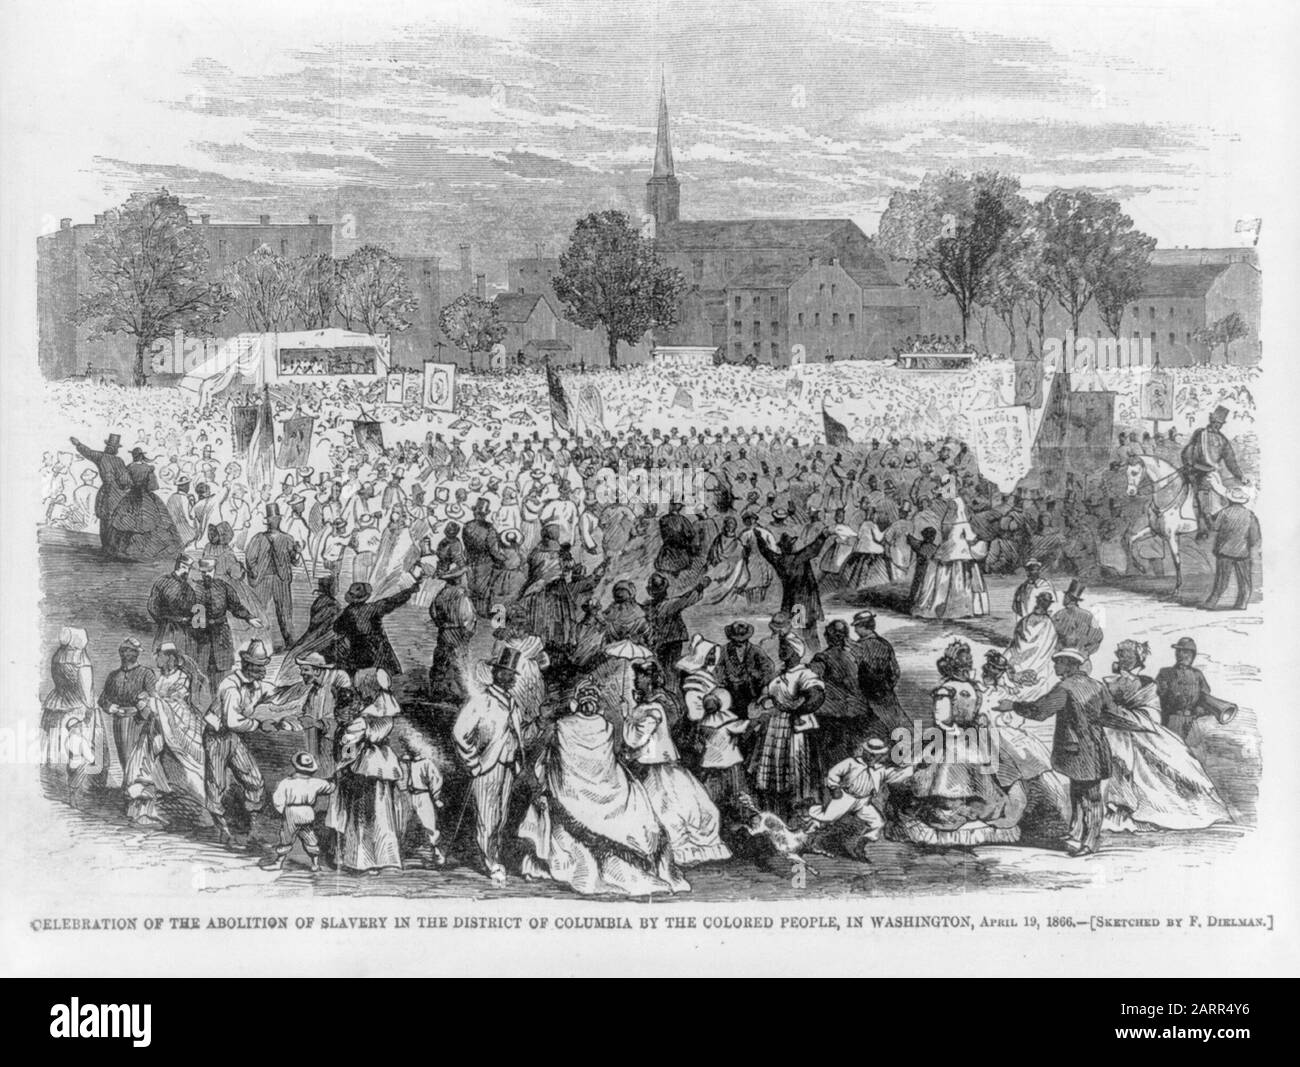 Celebration of the abolition of slavery in the District of Columbia by the colored people in Washington DC, April 19th 1866, print 1866 Stock Photo